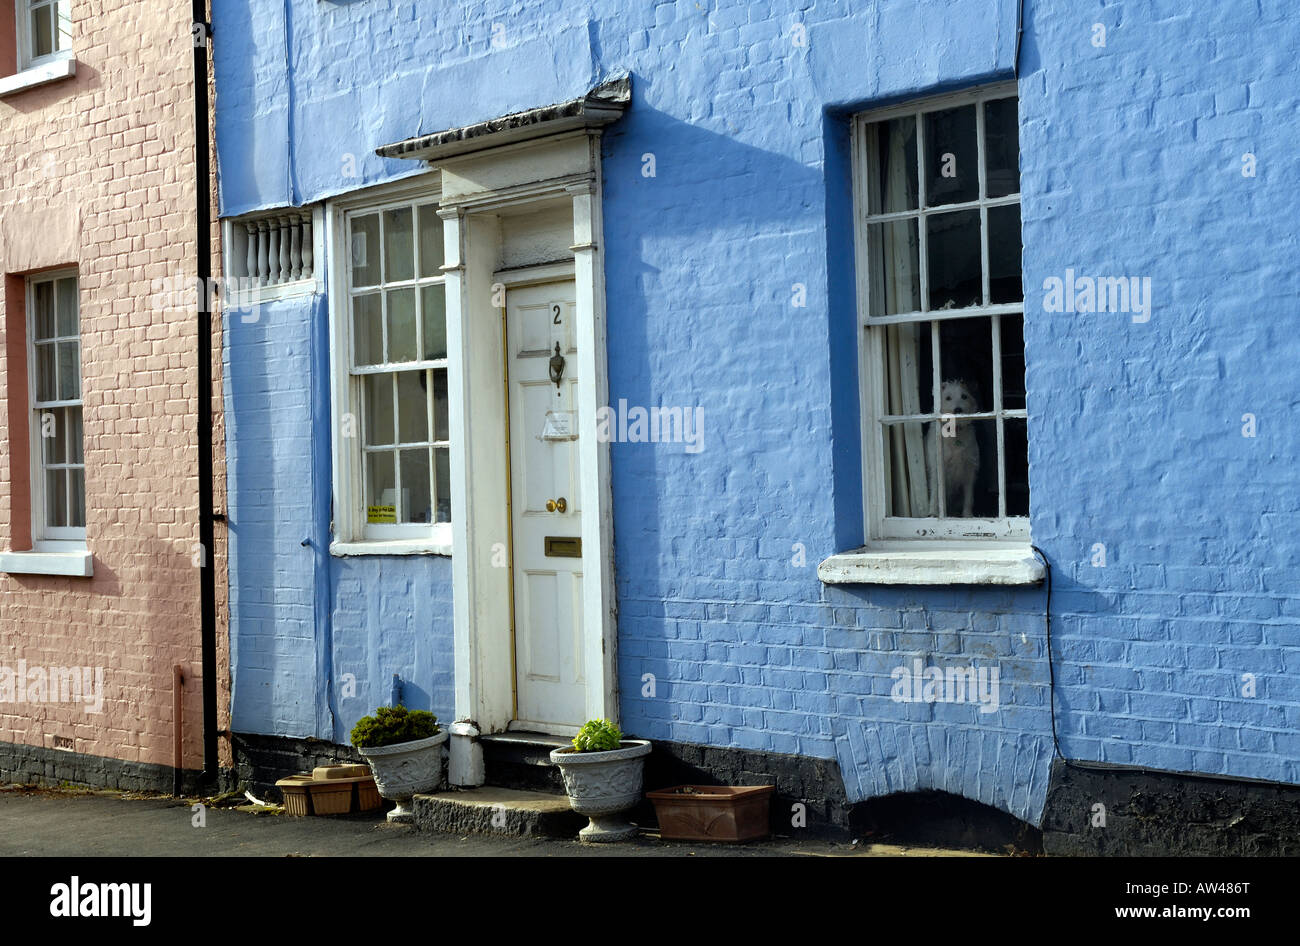 Dog in window of cottage, Coggeshall Essex Stock Photo